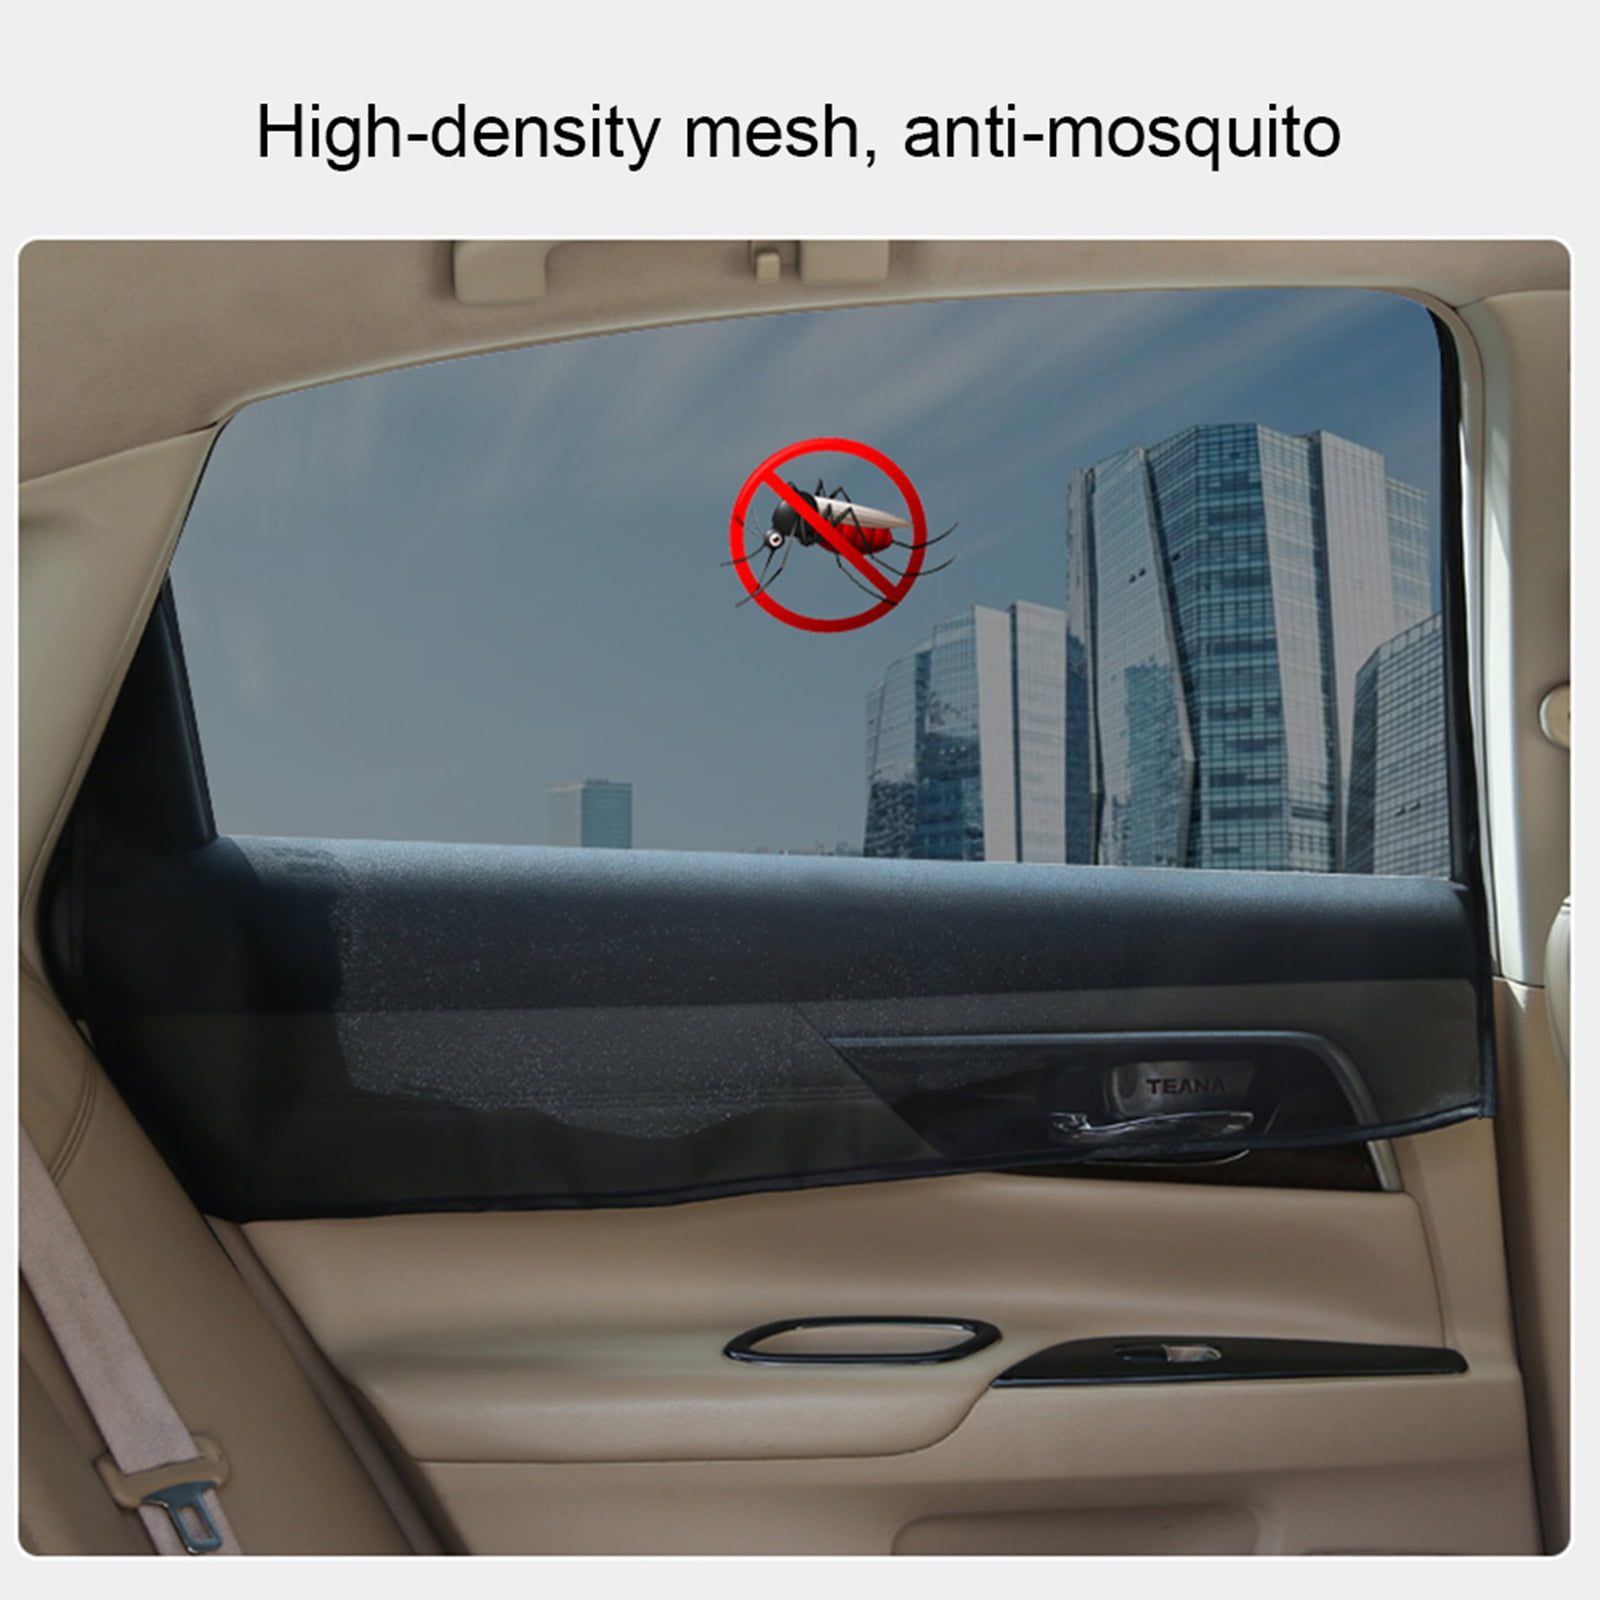 4Pcs Car Front Rear Side Window Sun Shade UV Rays Block Breathable Sunshade Blinds for Baby Kids Adults Pet Fits Most Vehicle One-way Perspective Installation-free Magnetic Curtain 